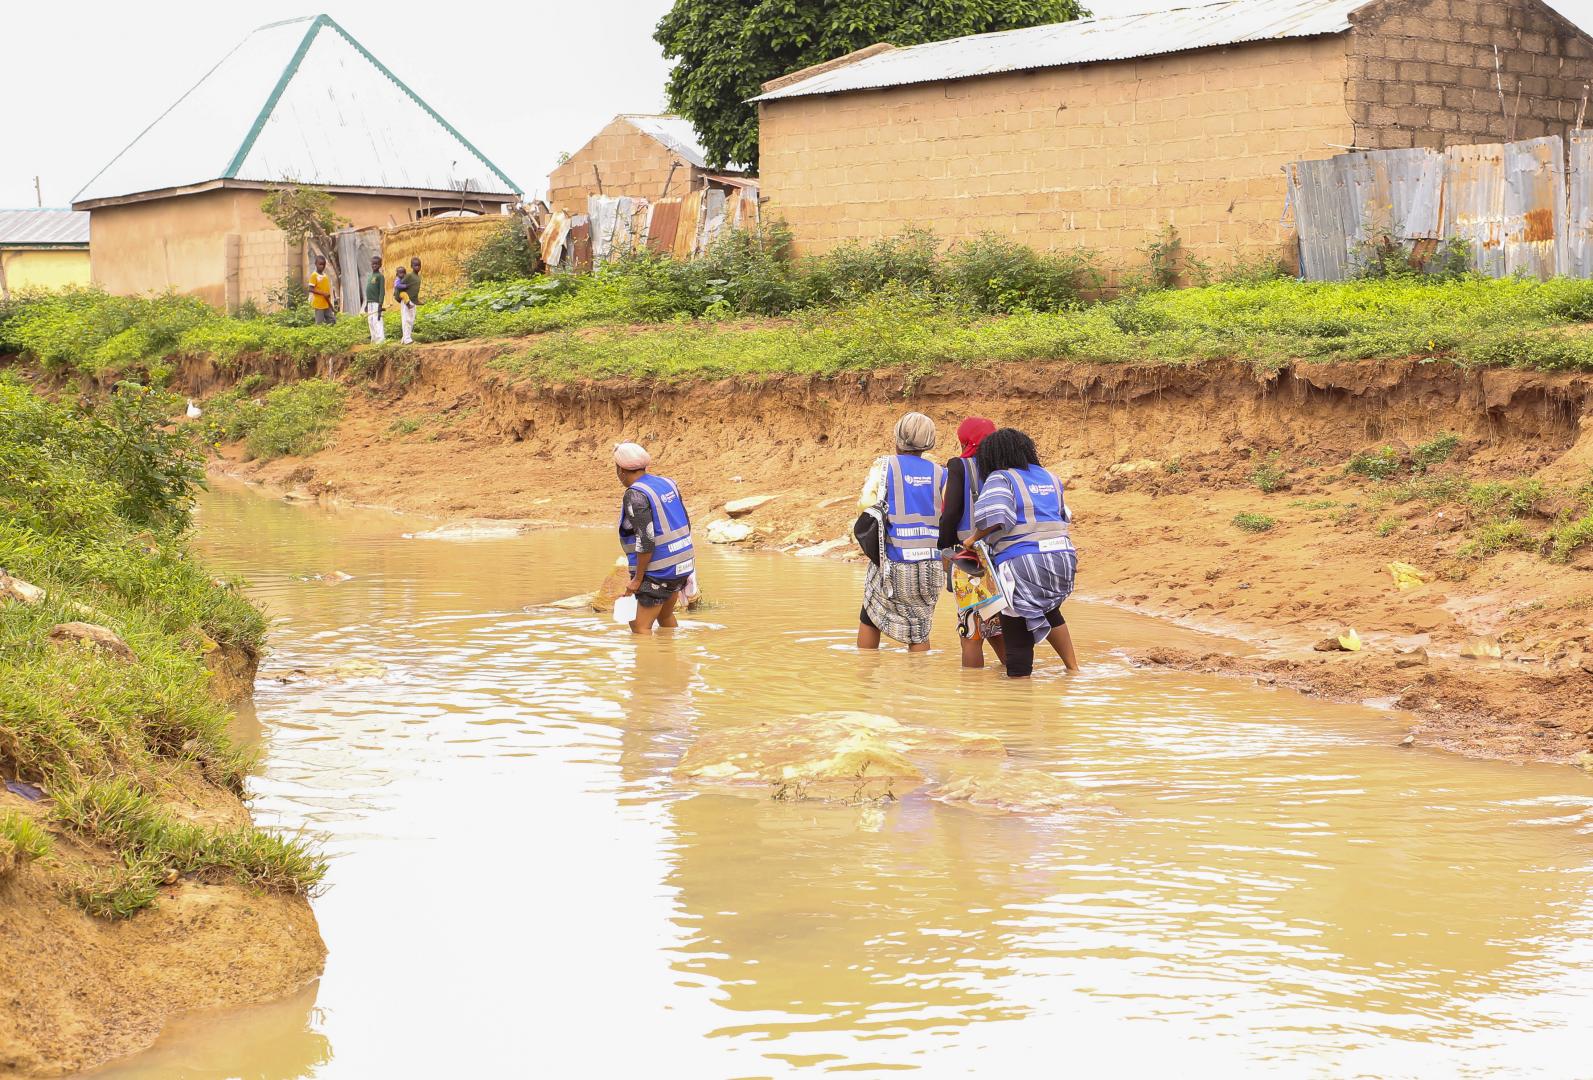 WHO personnel on active surveillance in flood-prone community of Adamawa State.jpg